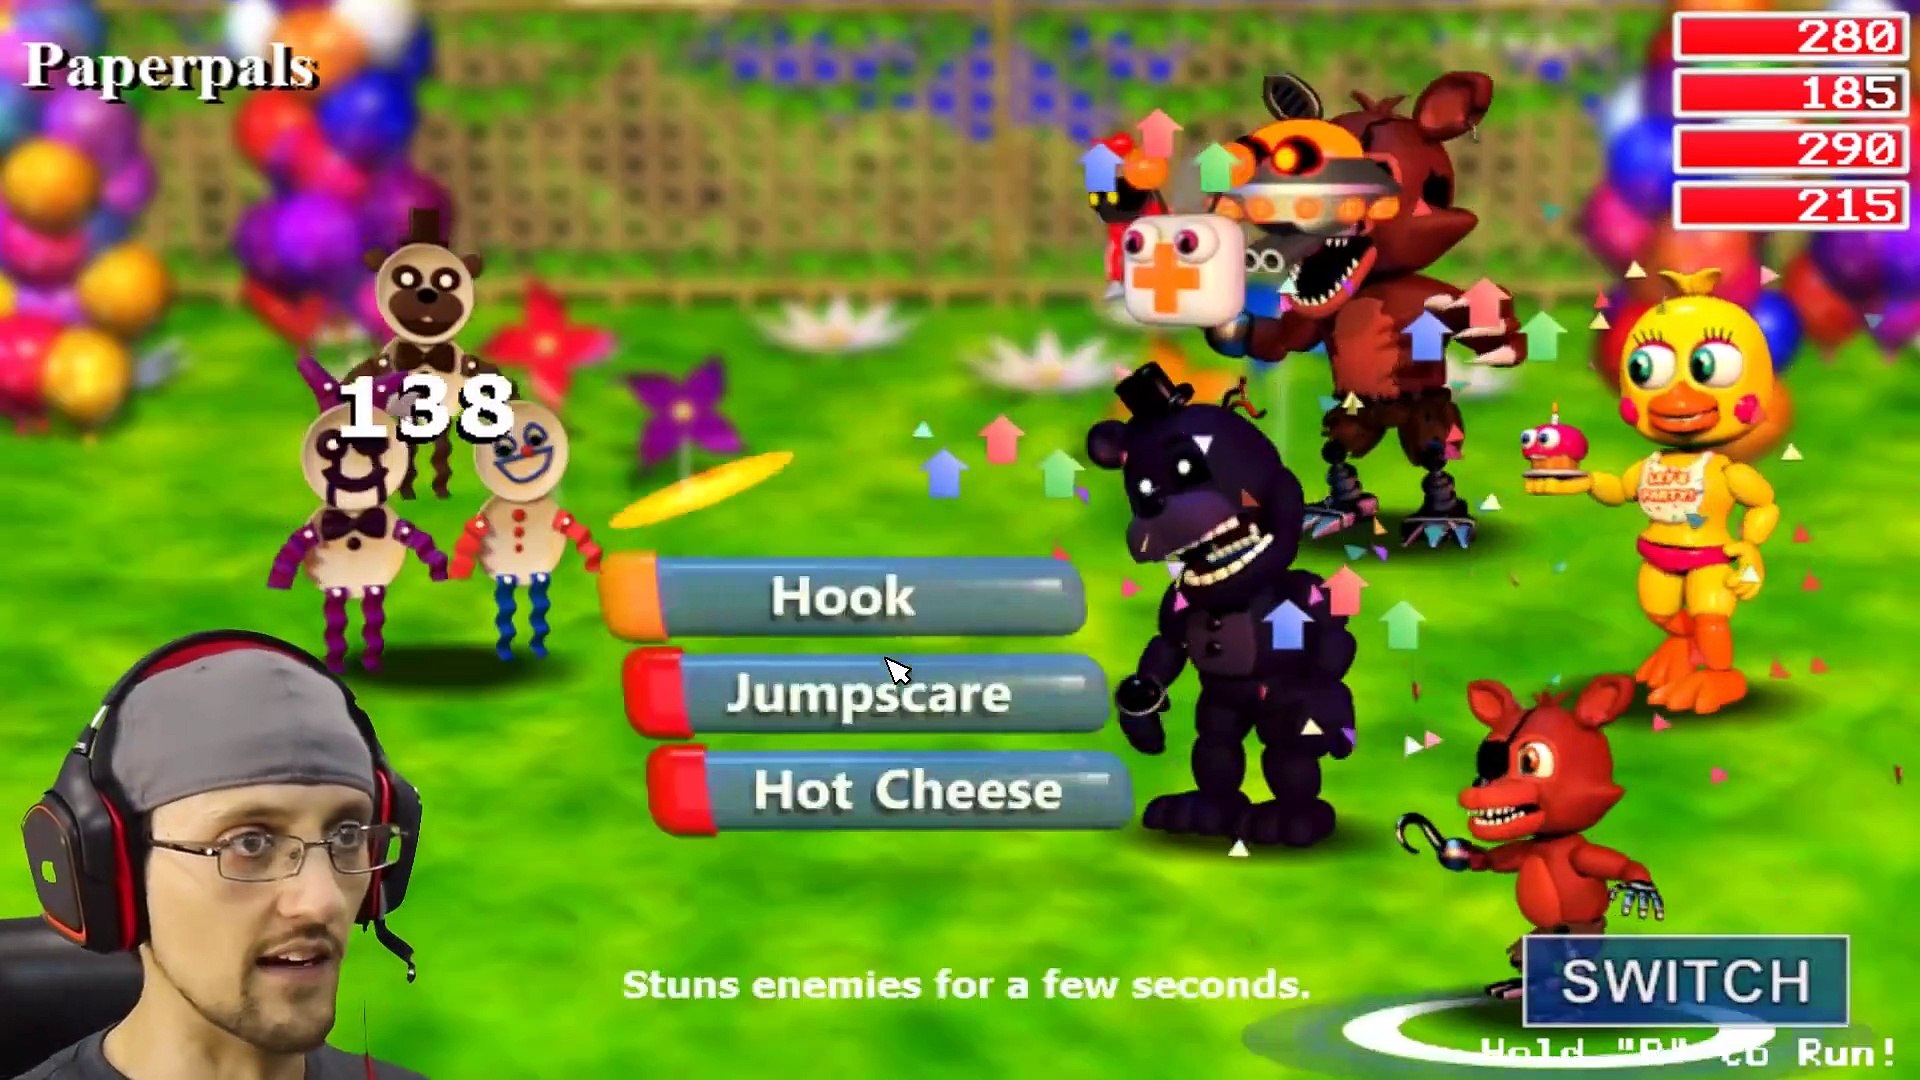 FNAF World full game - Five Nights at Freddy's World game